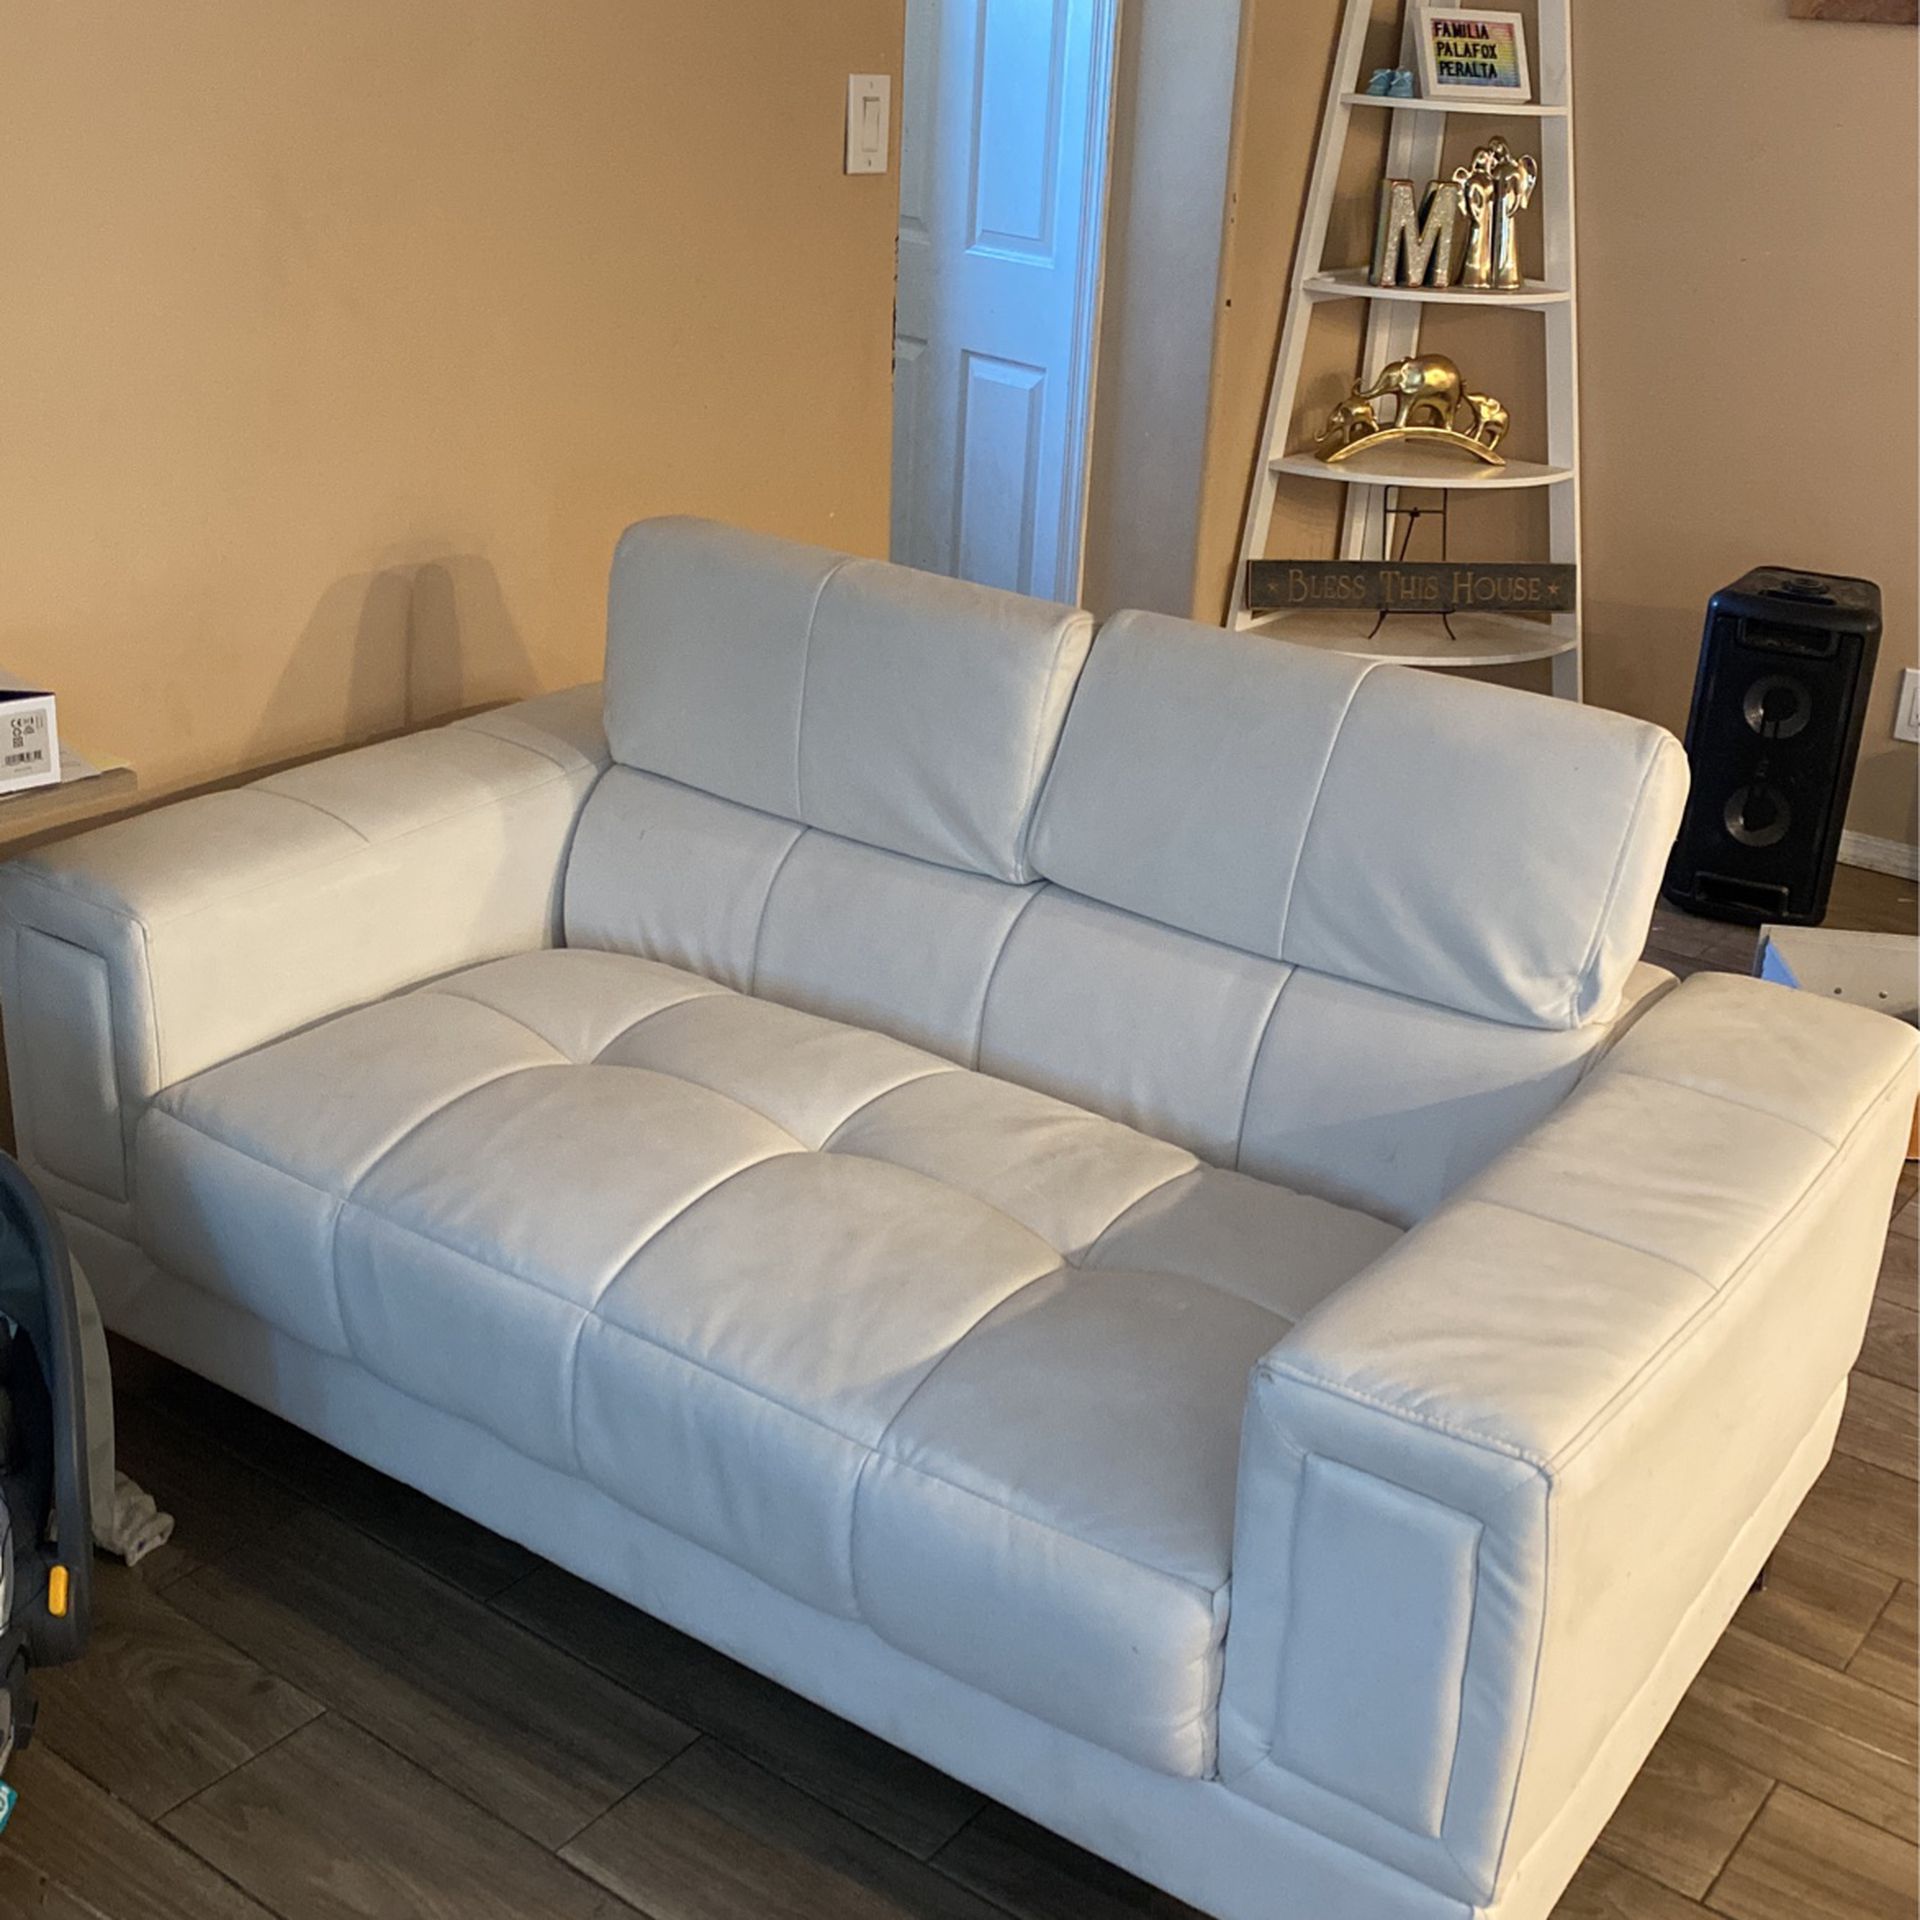 White Leather Couch And Love Seat 